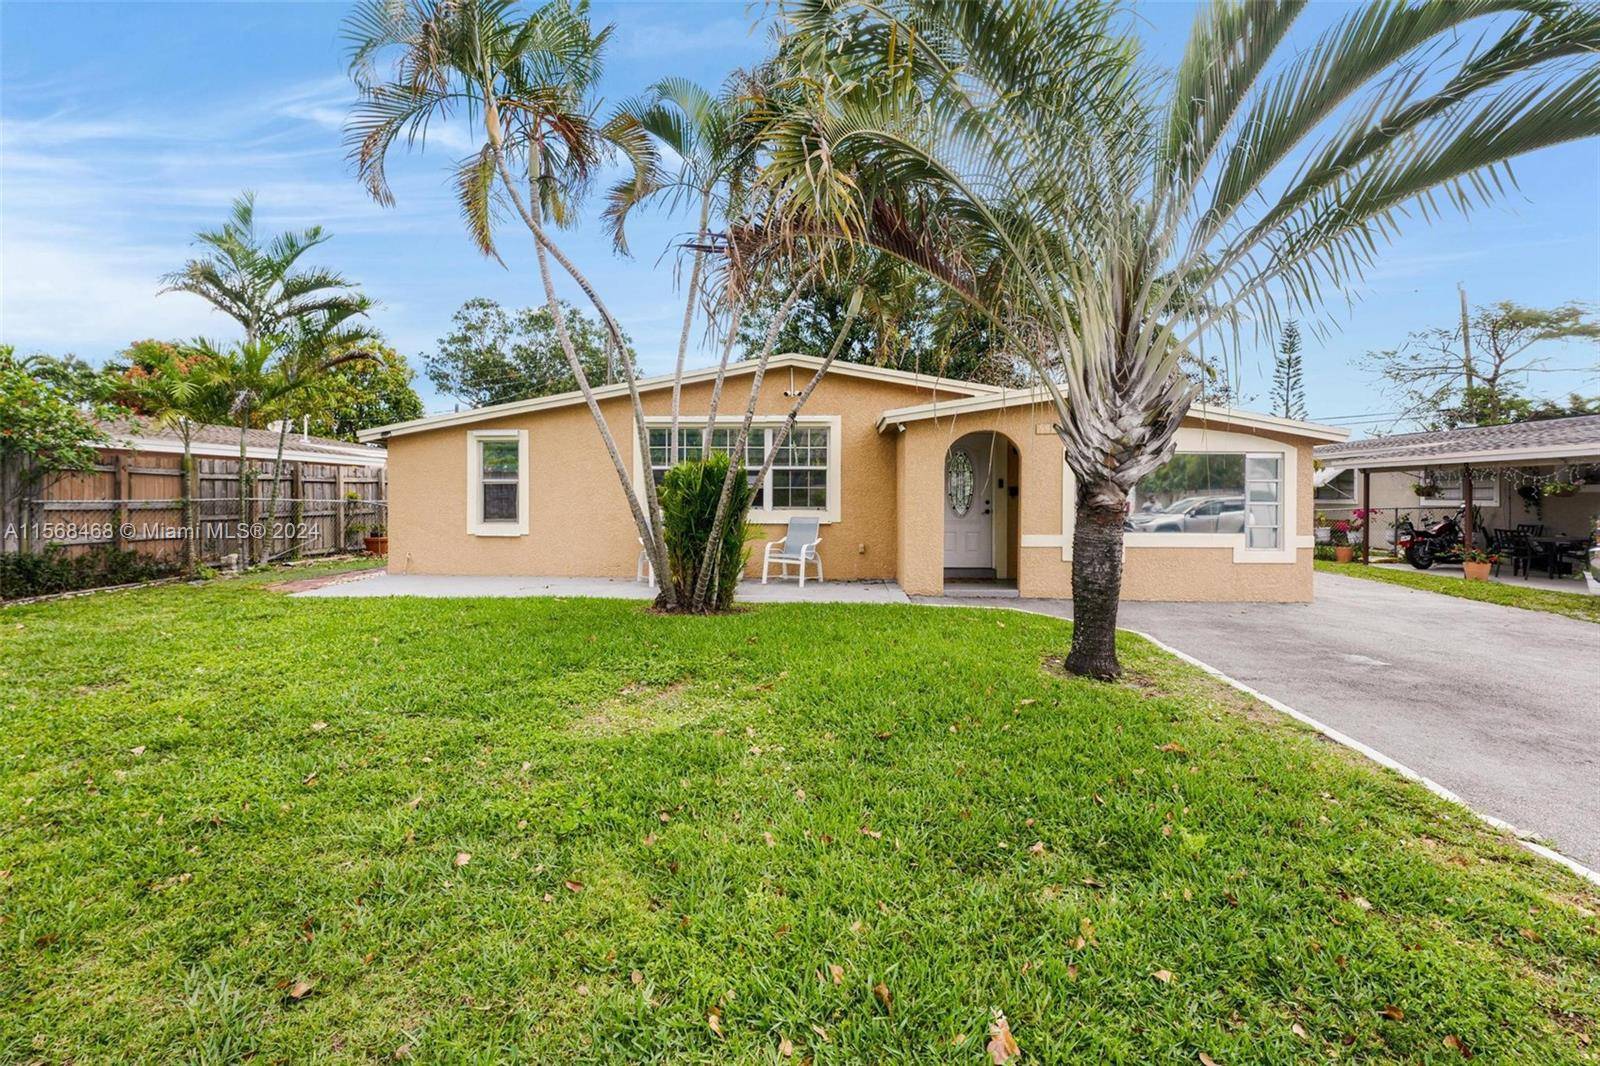 Family Oriented Community at North Andrews Gardens this 3 bedroom home features a convertible den for a 4th bedroom or carport garage, and a fully gated landscaped backyard with partial ...